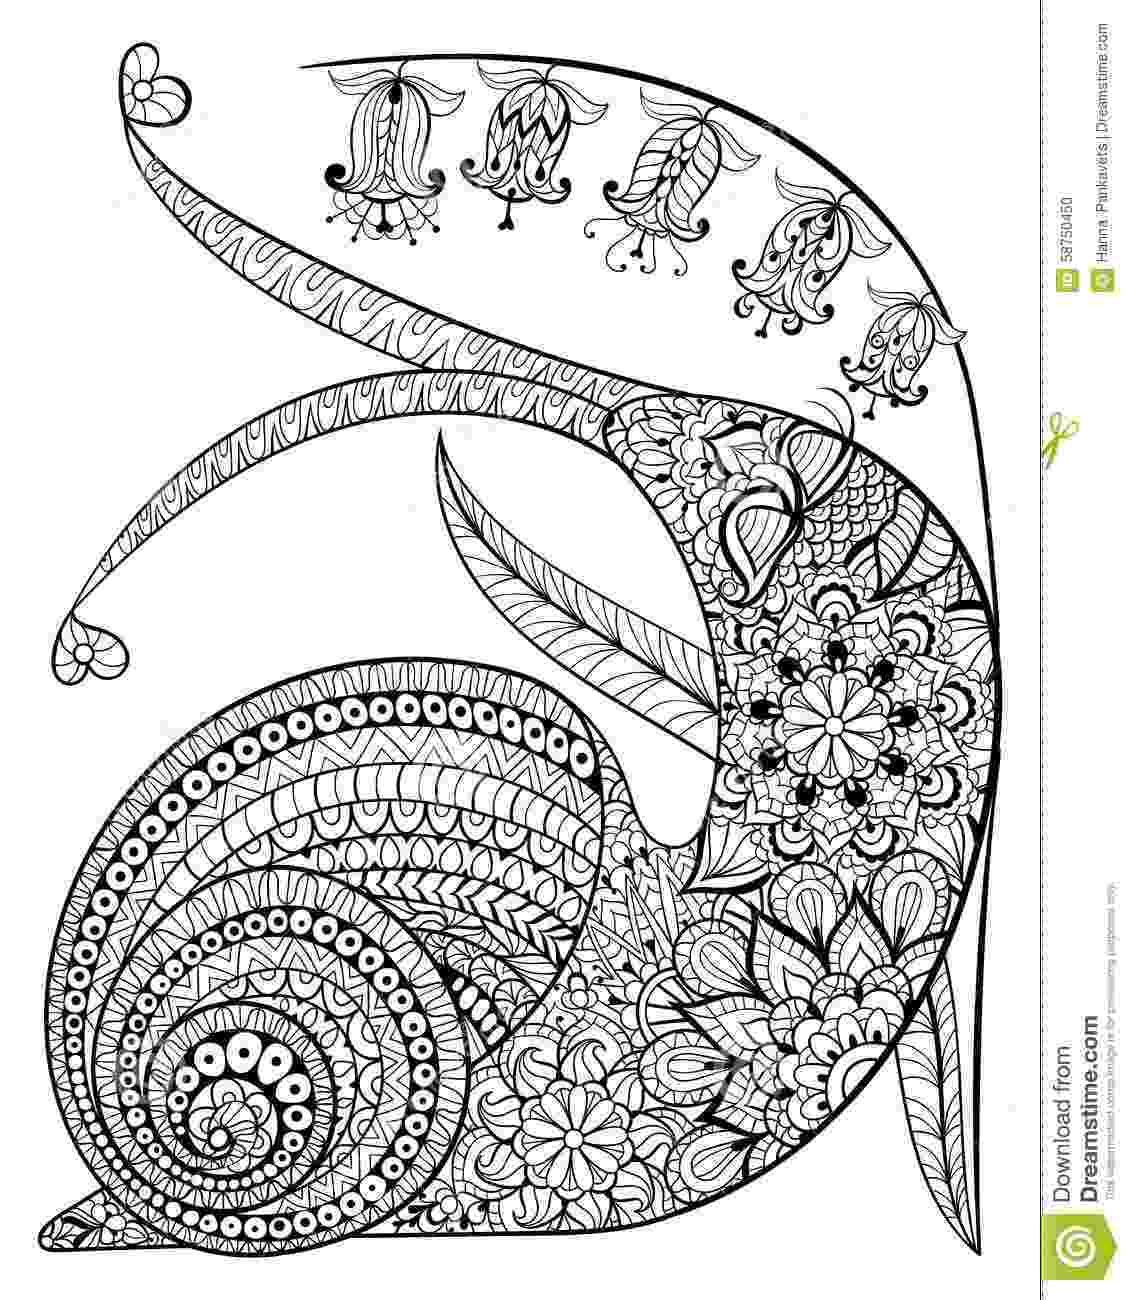 anti stress coloring book animals hand drawn contented snail and flower for adult anti book coloring anti animals stress 